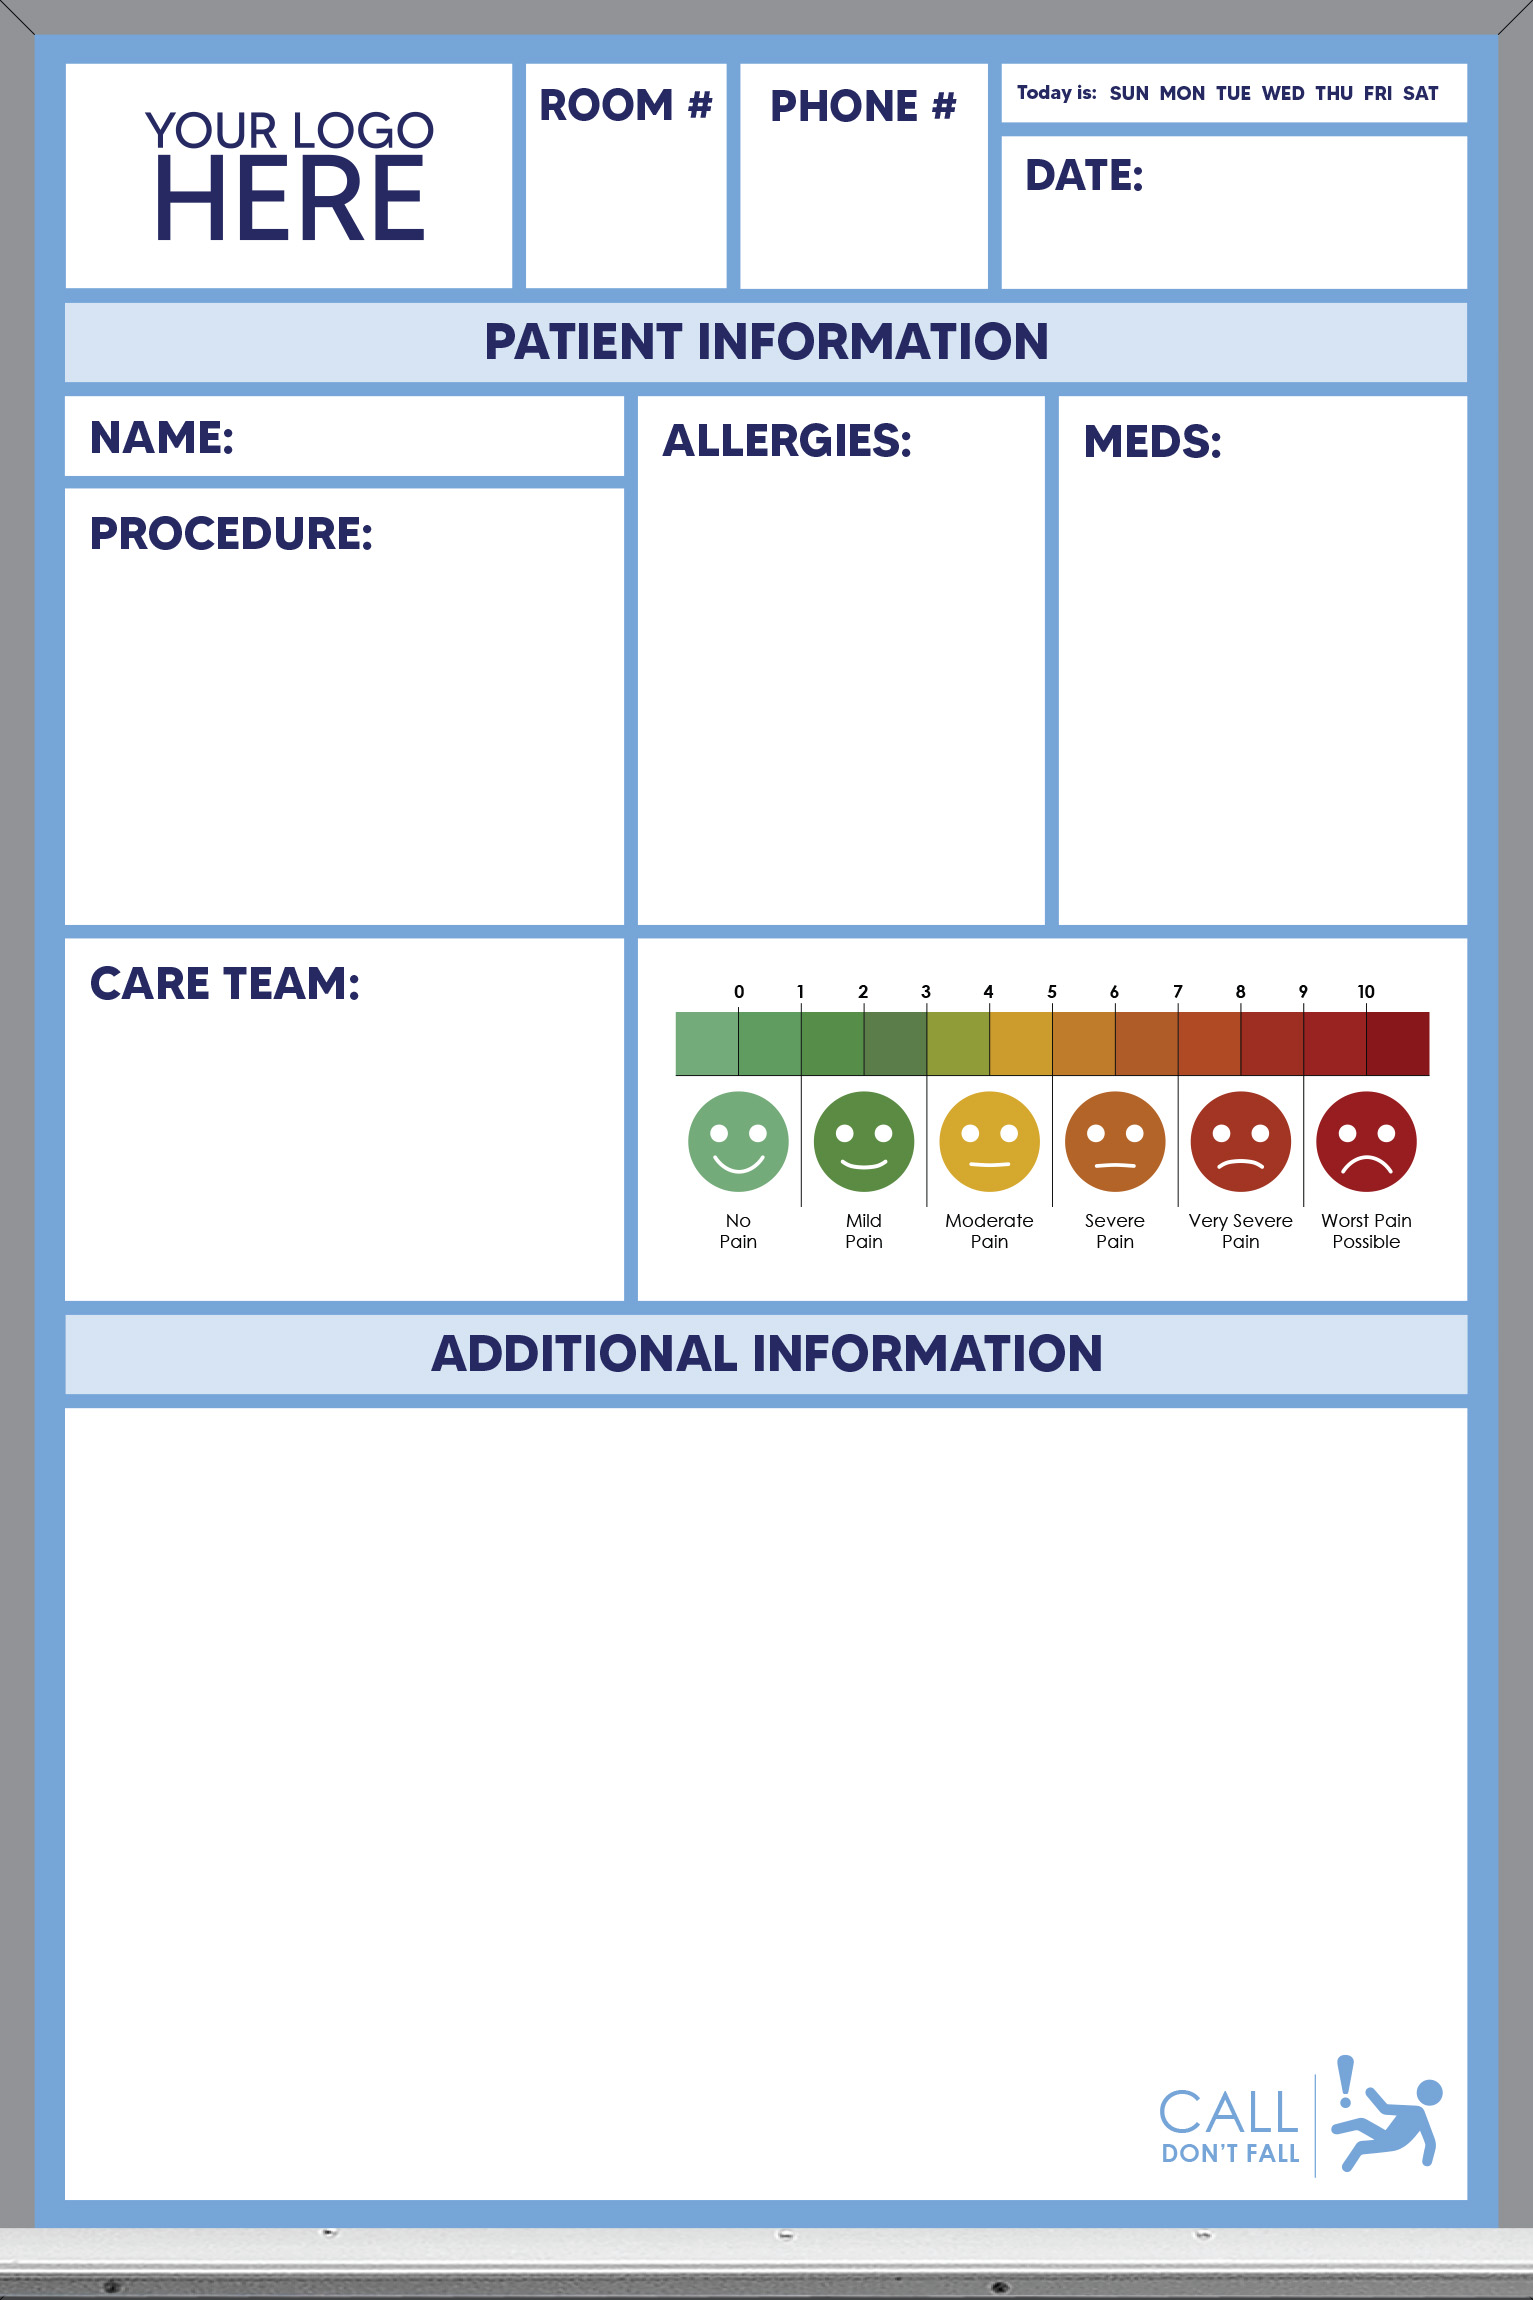 pre-printed patient care whiteboard, blue color, 3x2